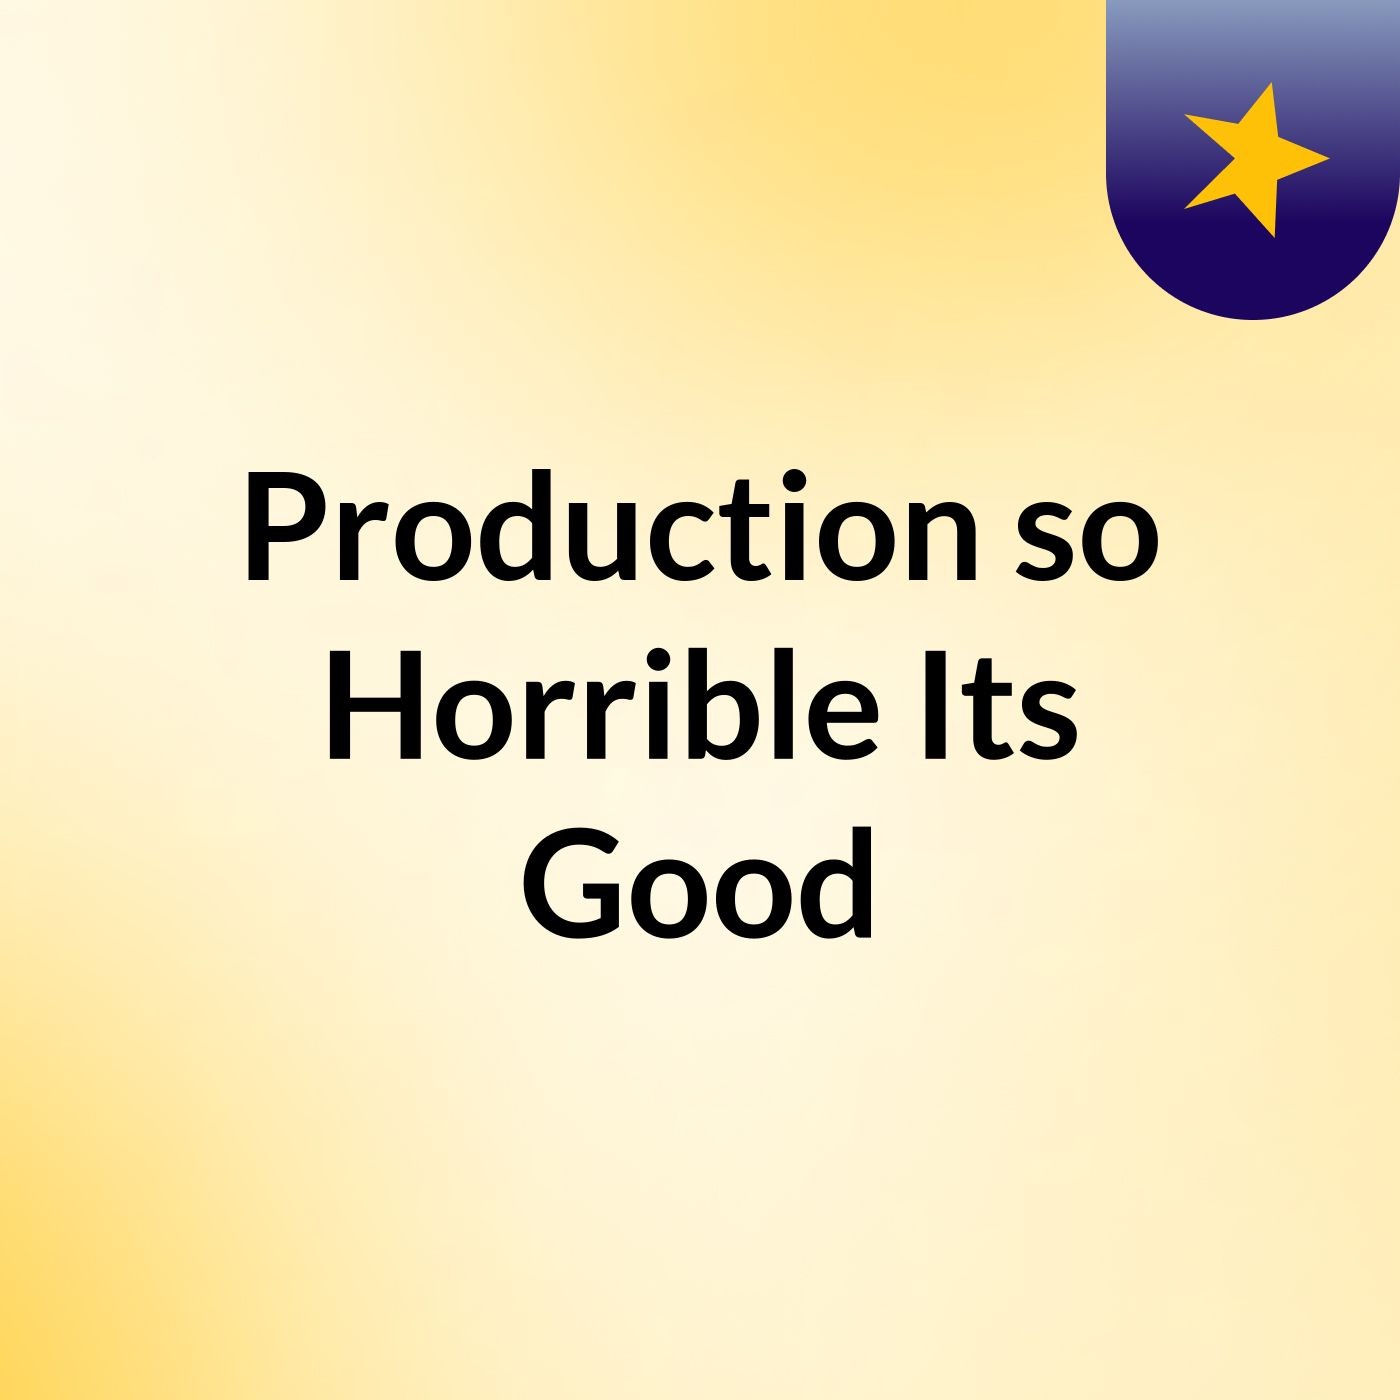 Production so Horrible Its Good